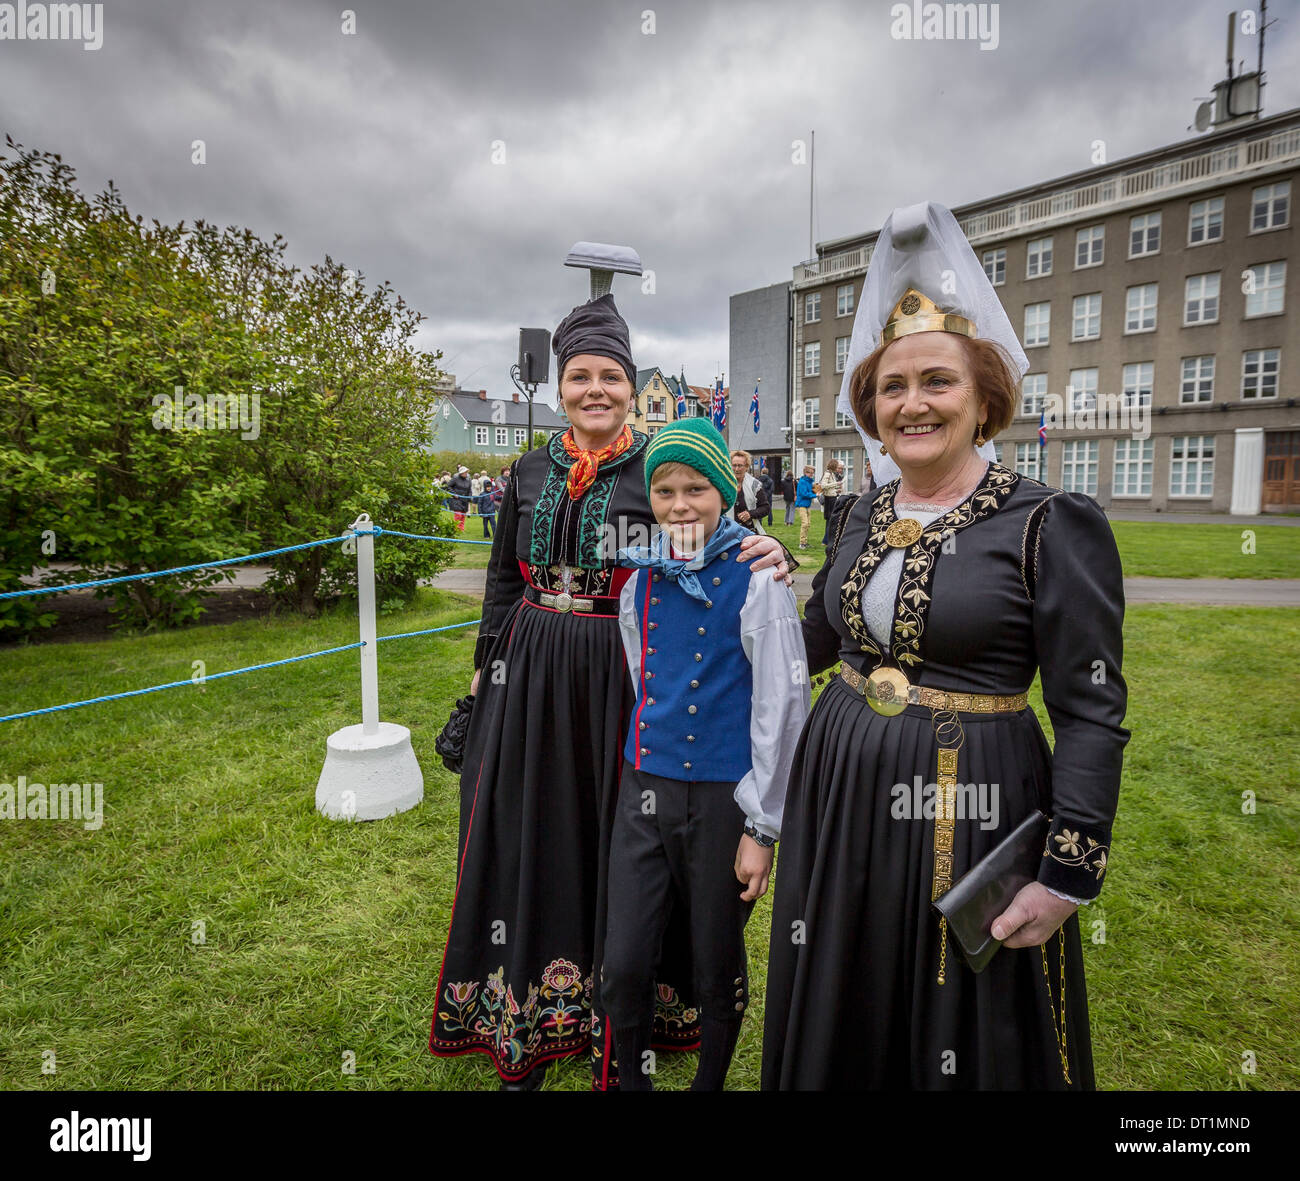 Dressed in traditional Icelandic costumes on June 17th, Iceland's Independence day  Reykjavik, Iceland Stock Photo